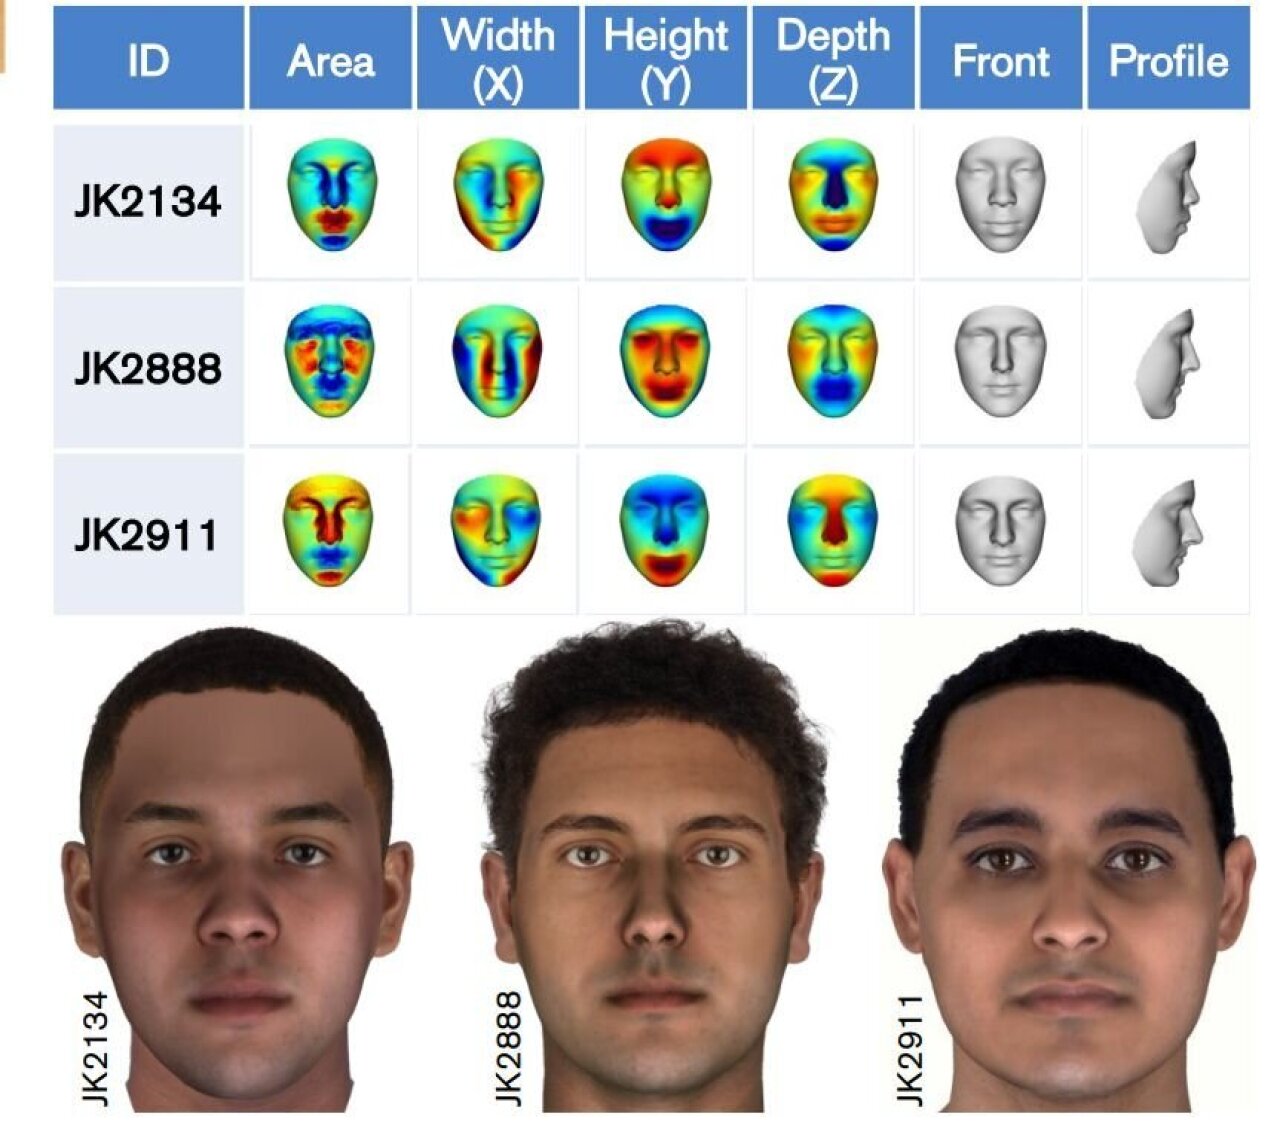 [IMAGE] Faces of three ancient Egyptian mummies recreated using DNA technology and thermal meshing